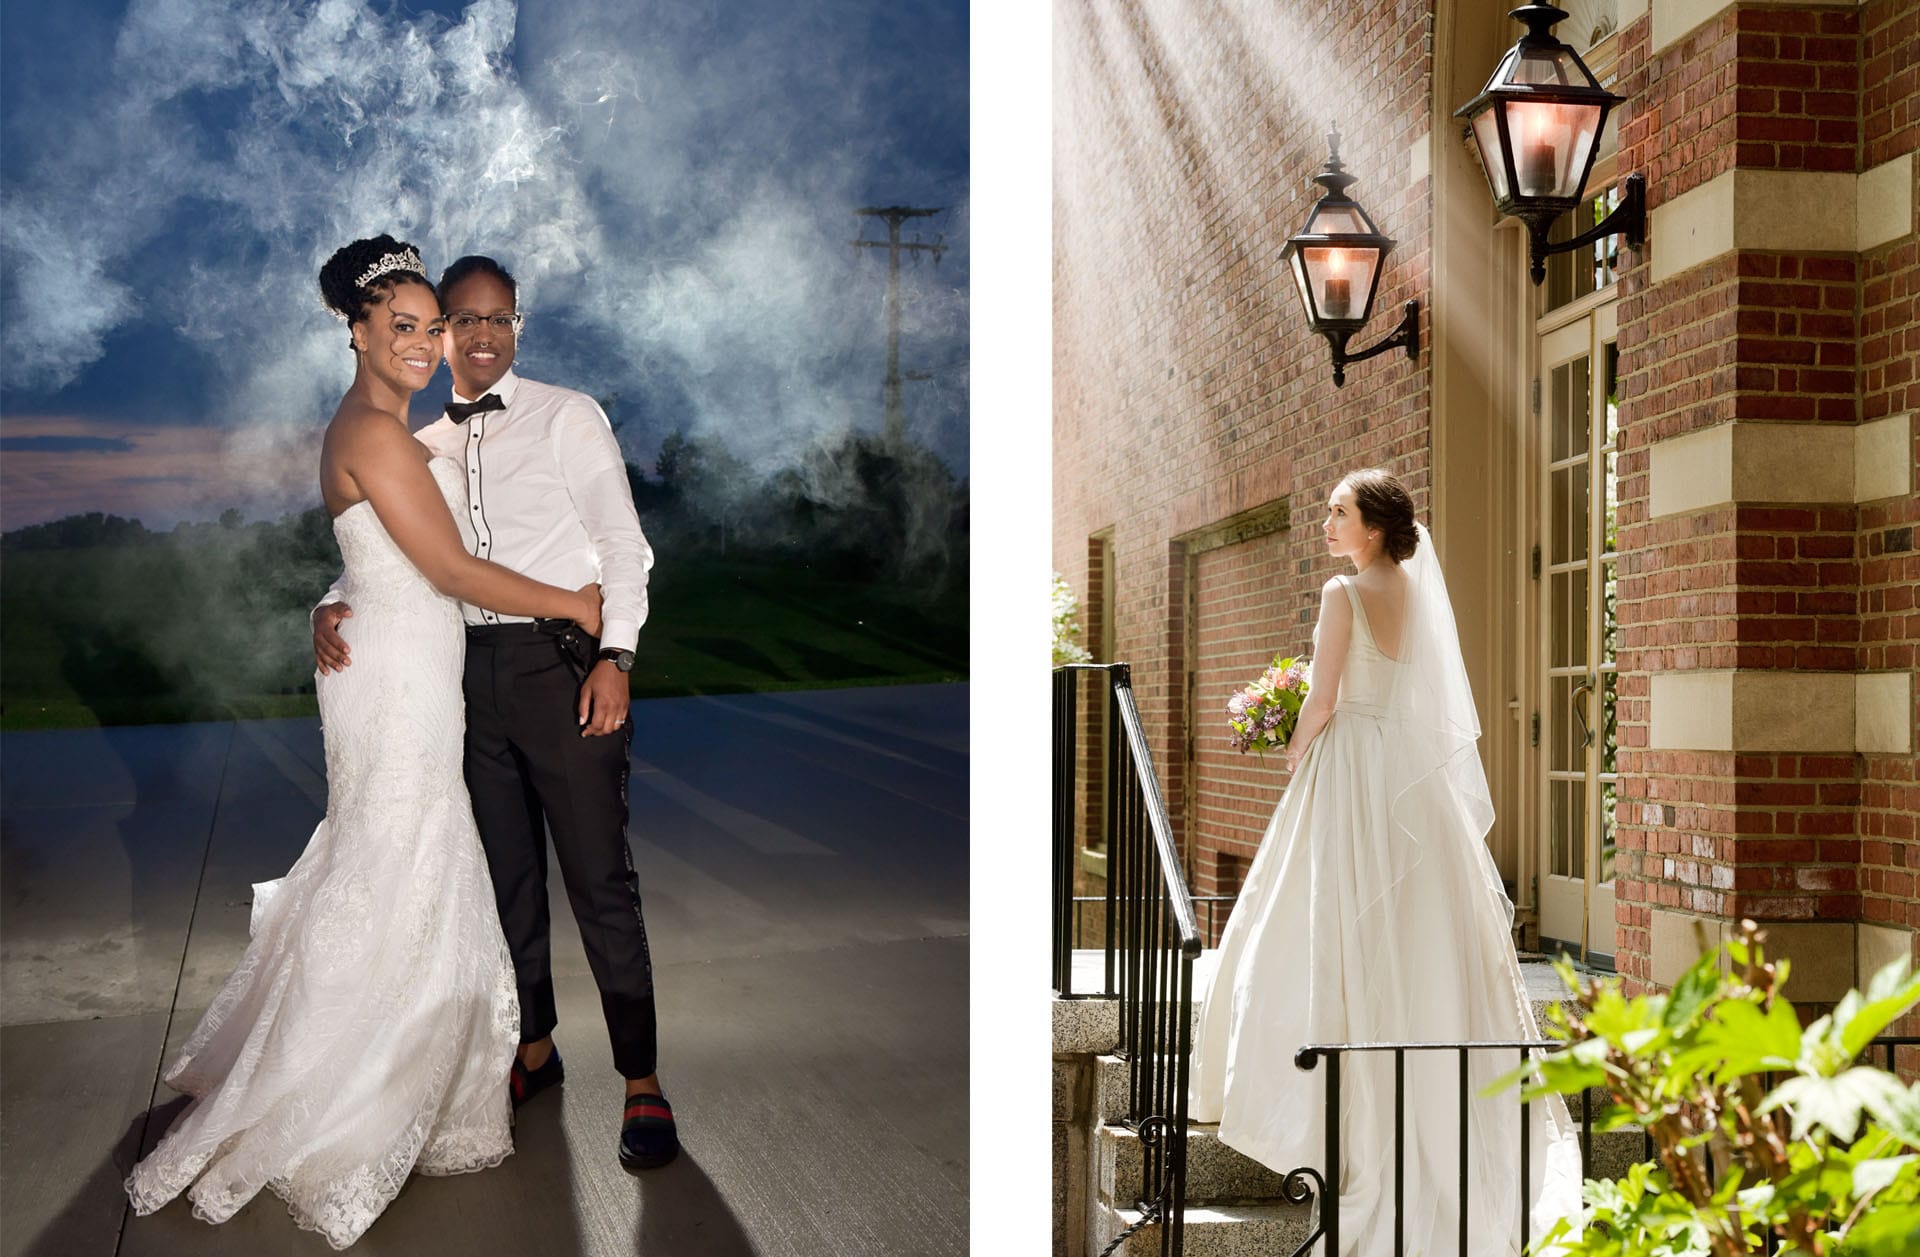 Creating wedding day art with the details like this wedding dress along with a beautifully lit bridal portrait taken at the historic Dearborn Inn in Dearborn, Michigan. 